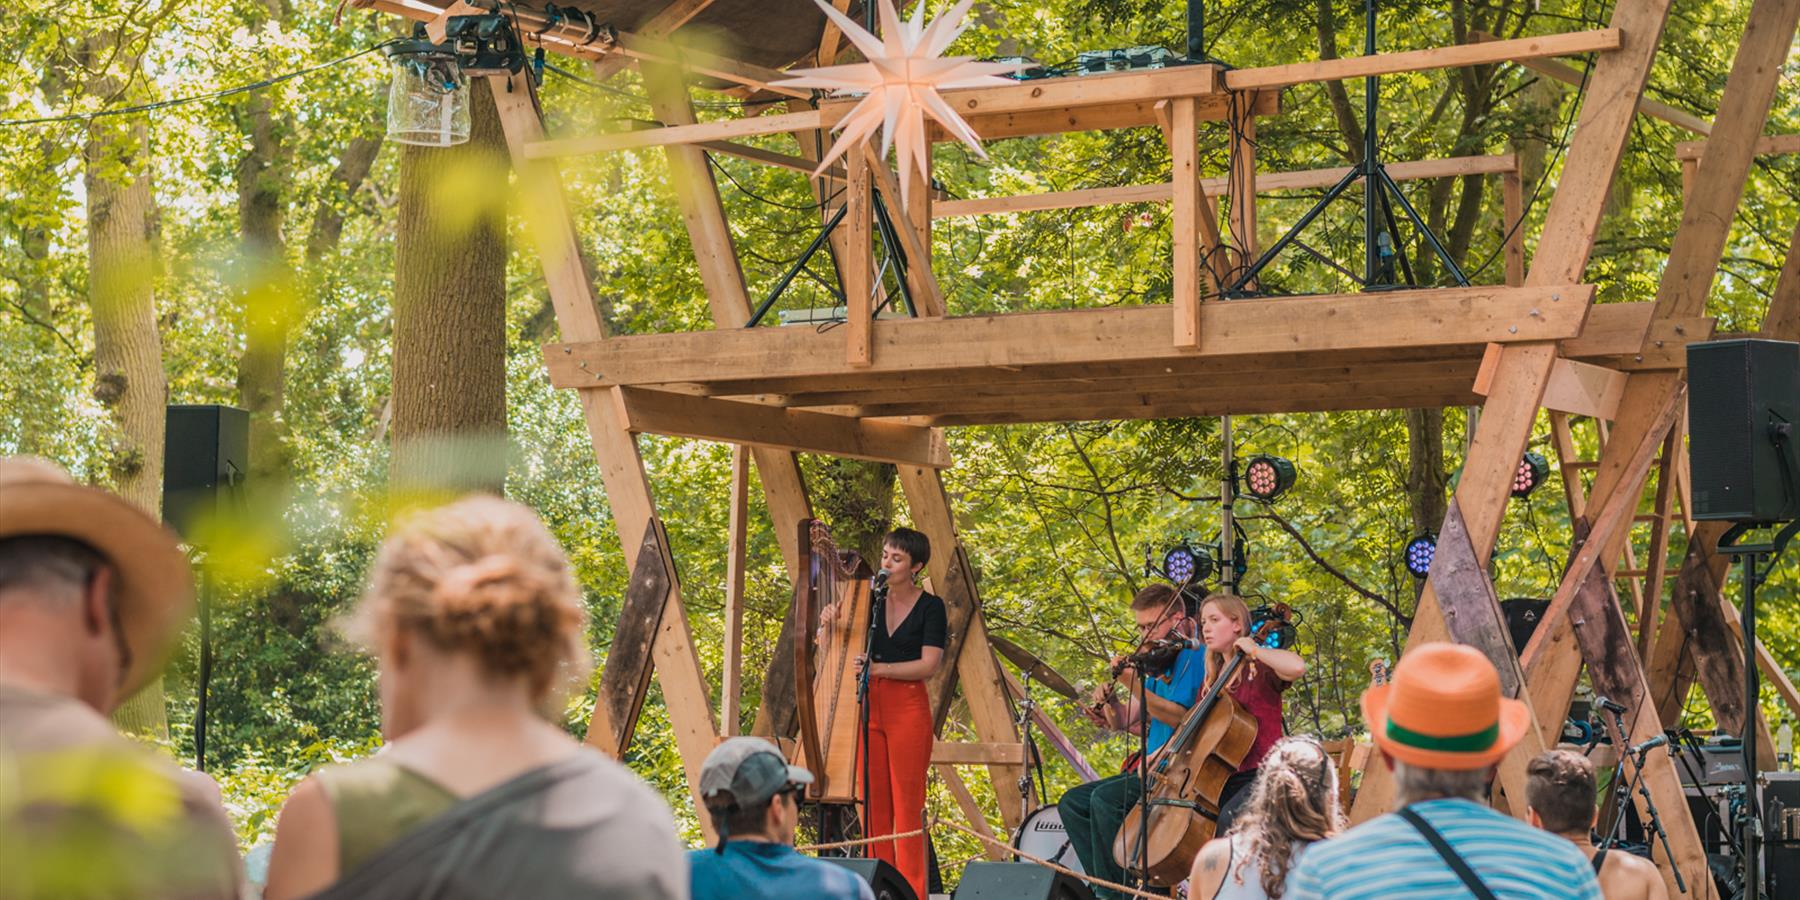 A musician with red trousers stands on the Eyrie Stage at Timber Festival surrounded by trees and an audience